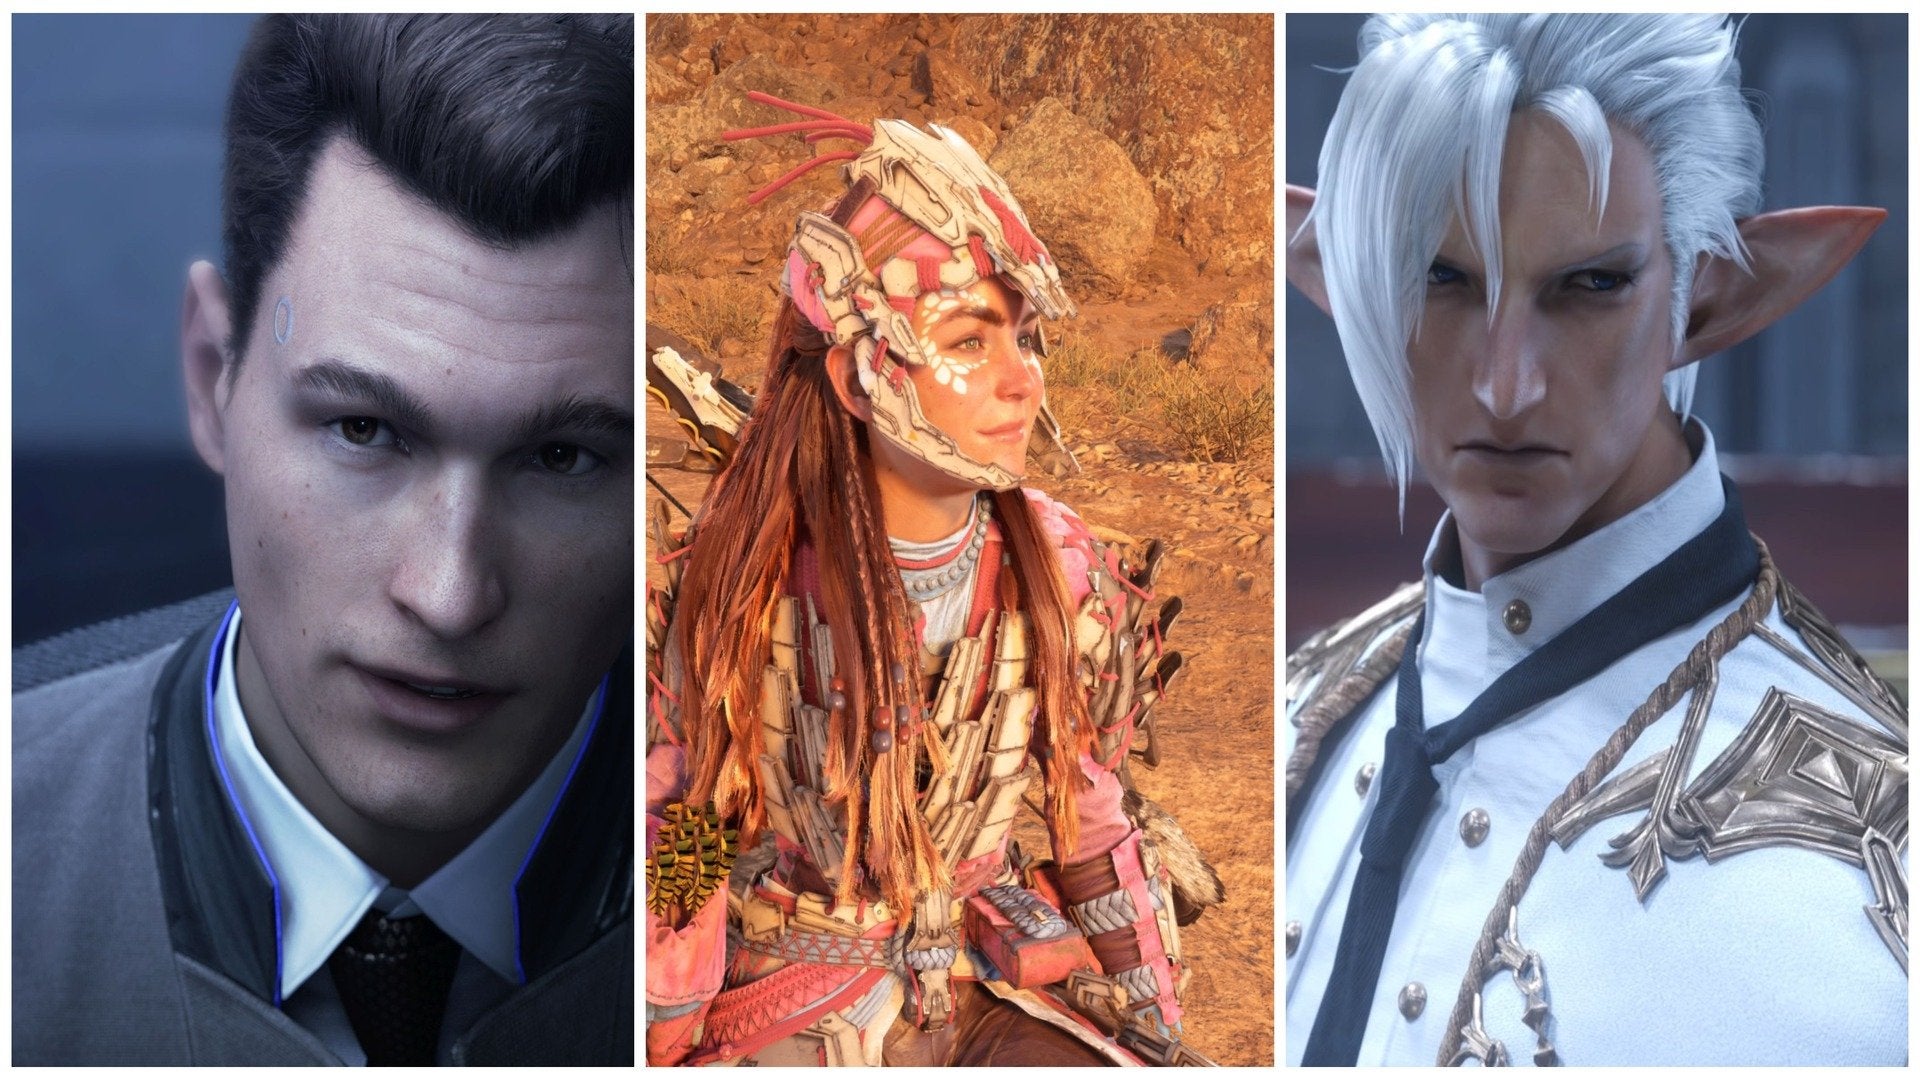 Conner from Detroit: Become Human, Aloy from Horizon: Forbidden West, and Fourchenault from Final Fantasy XIV.